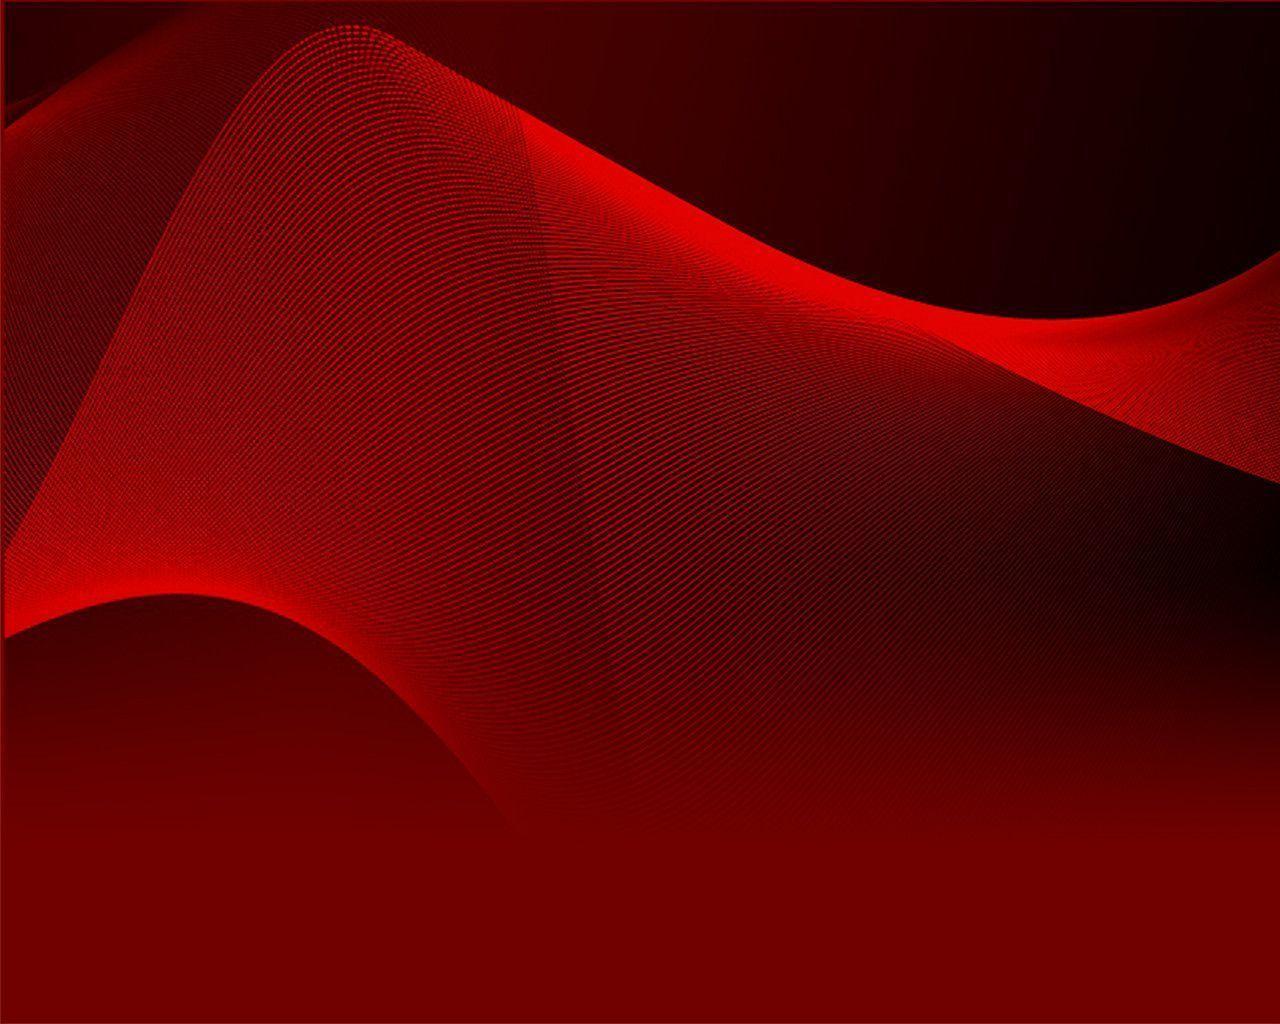 red background images